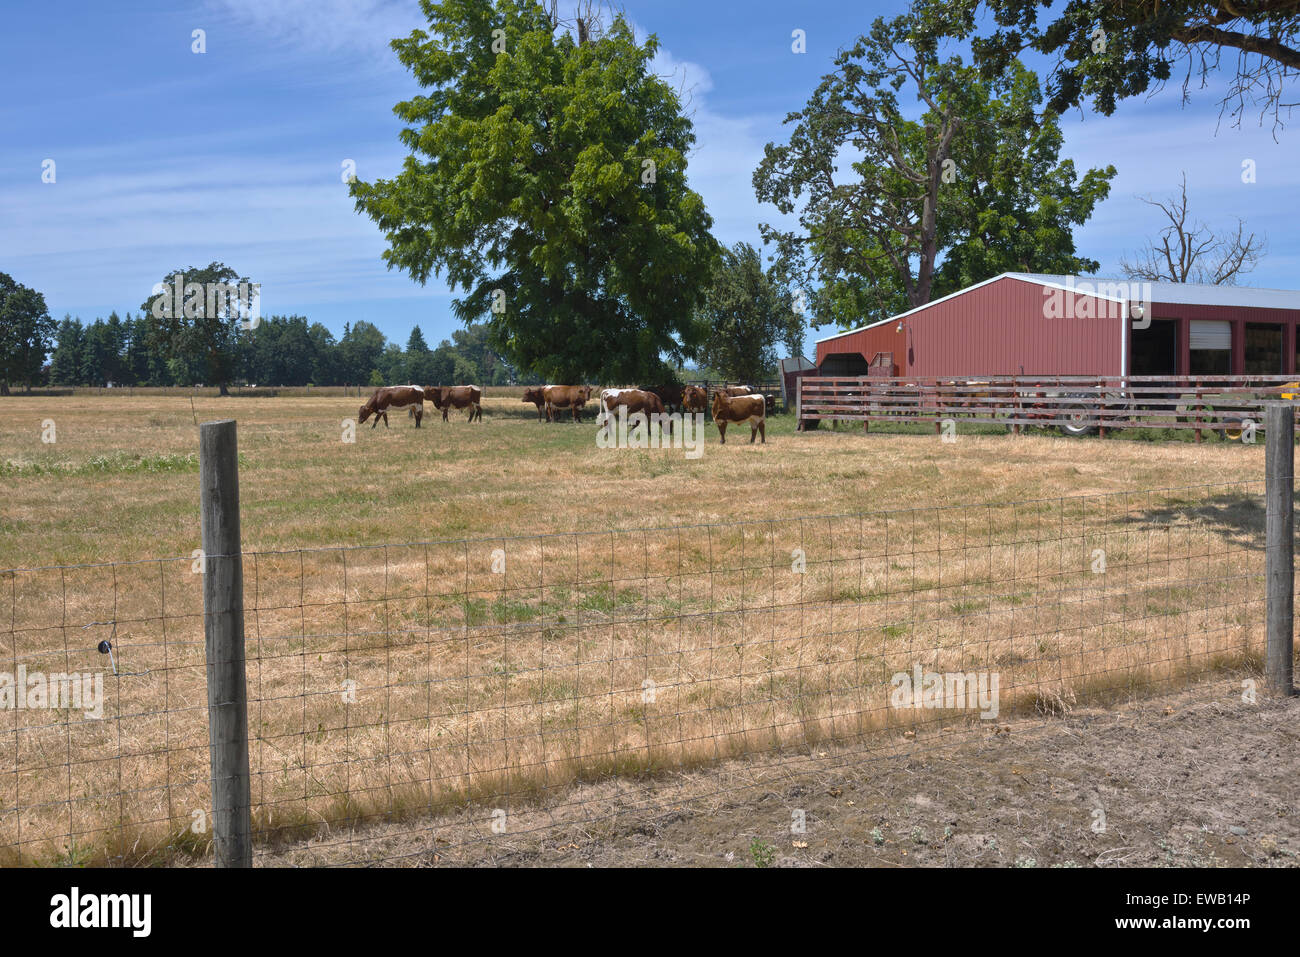 Cattles in a country farm Willamette valley Oregon. Stock Photo